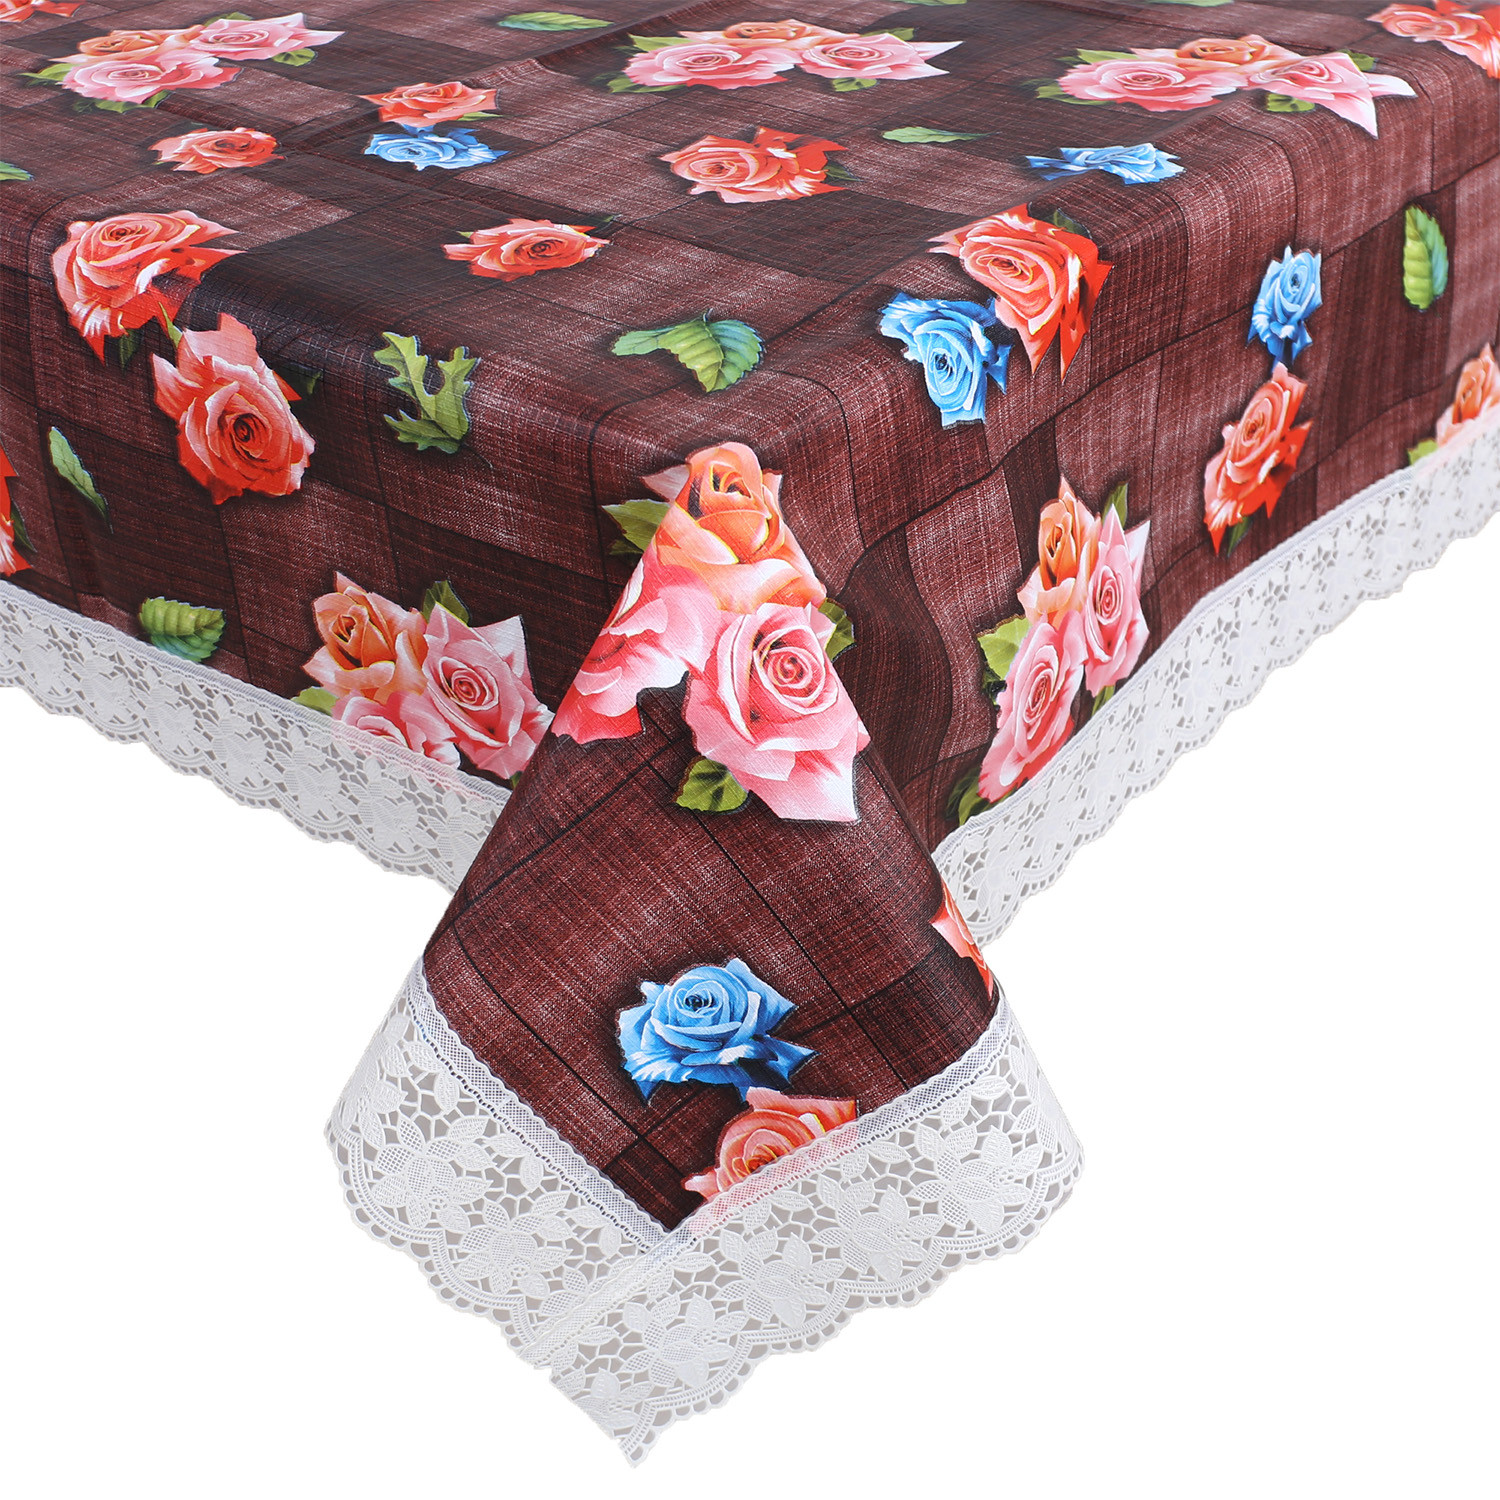 Kuber Industries Dining Table Cover|PVC Spill Proof Rose Floral Pattern Tablecloth|Kitchen Dinning Protector With Seamless Border, 60X90 Inch (Maroon)